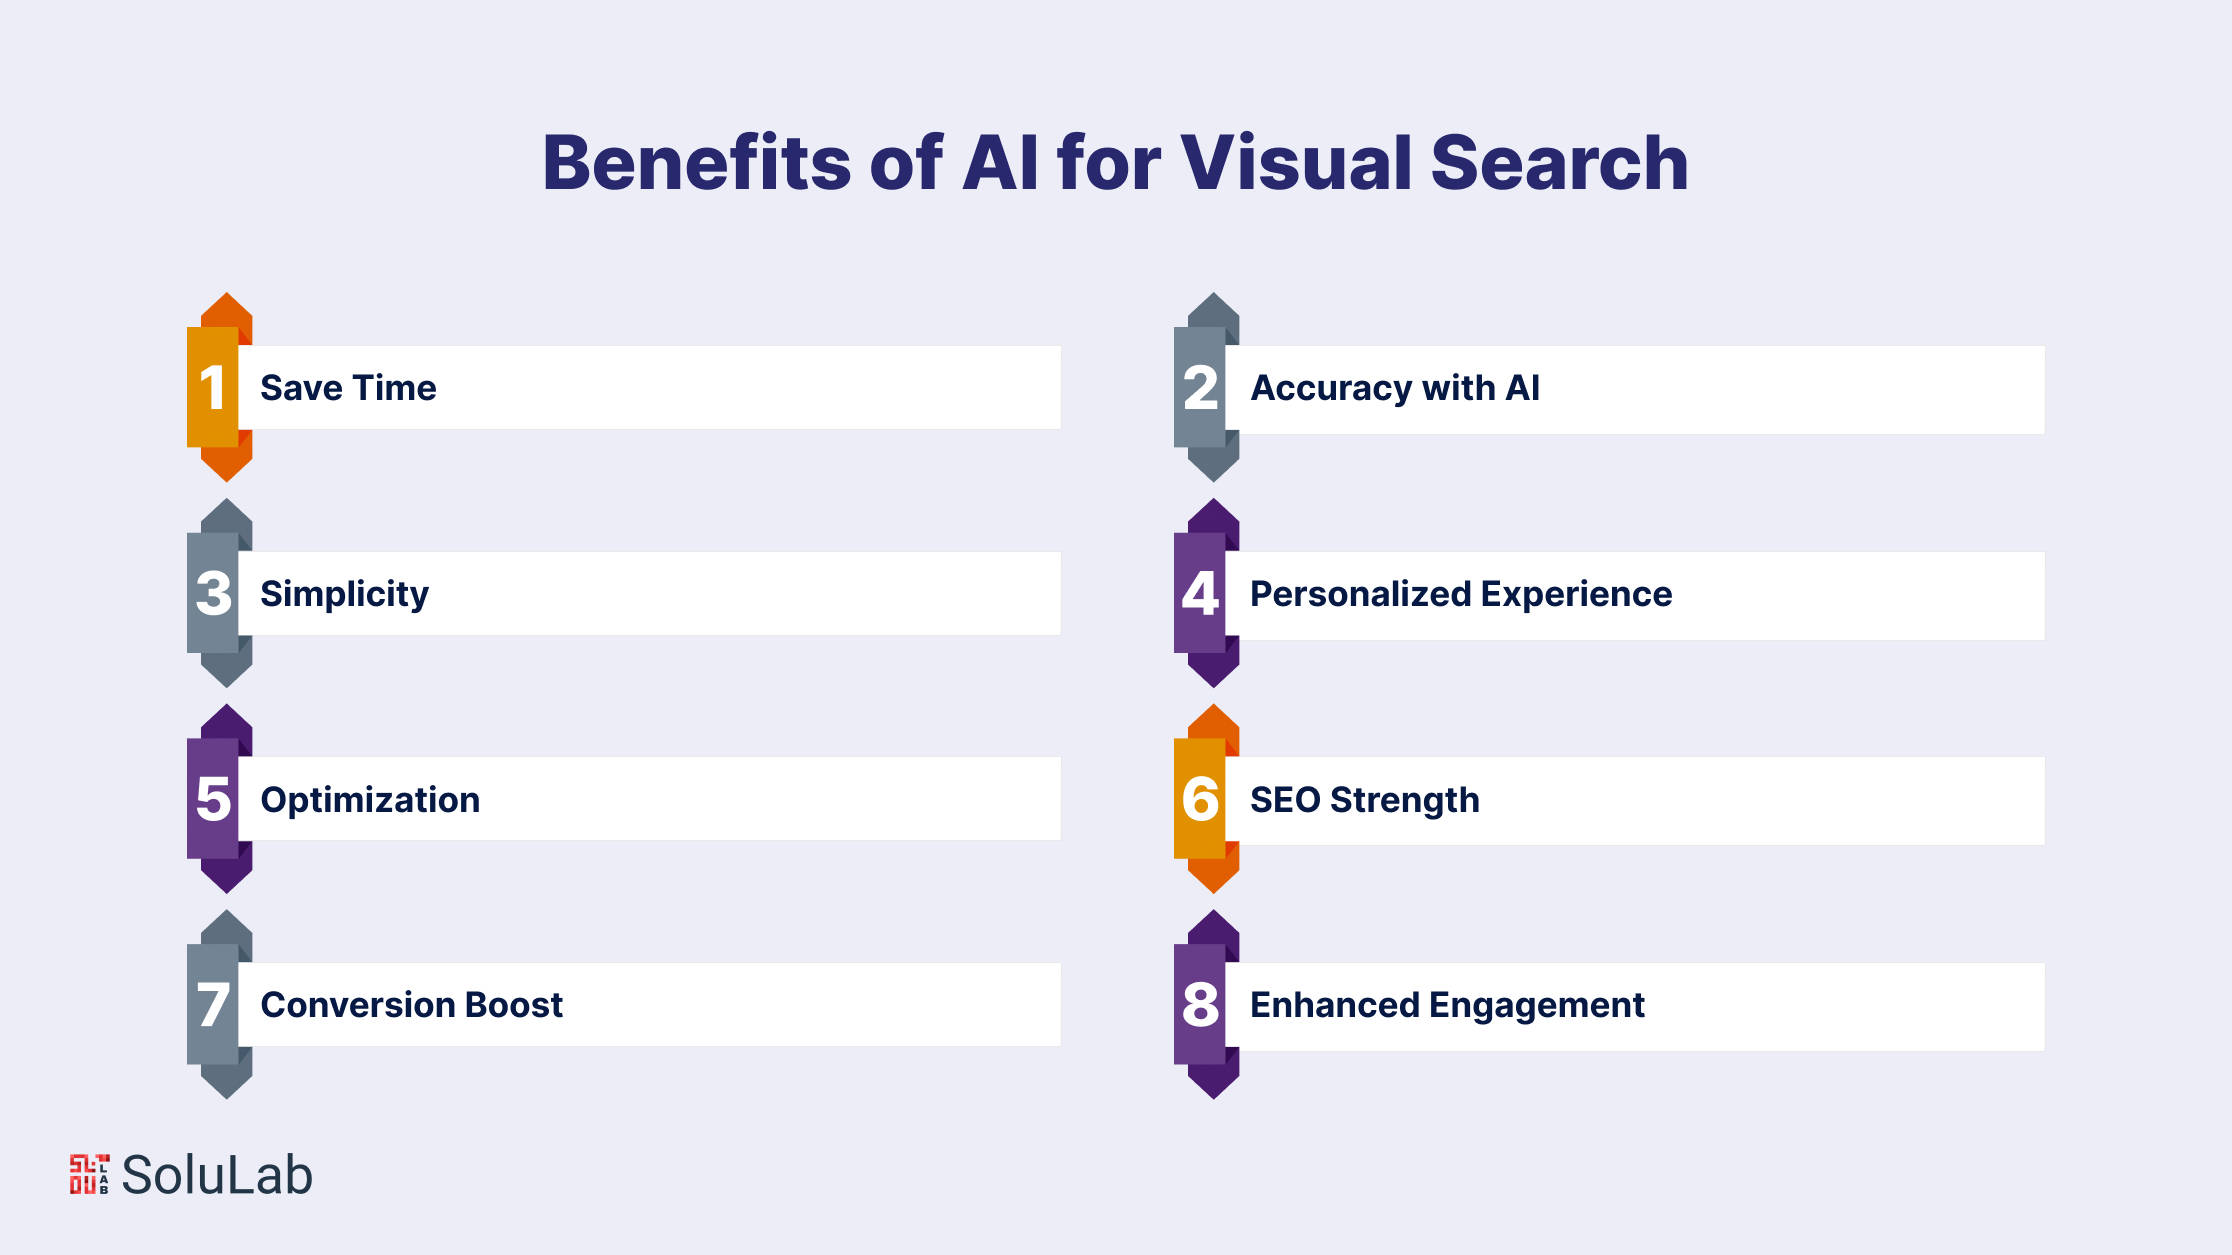 Benefits of AI for Visual Search